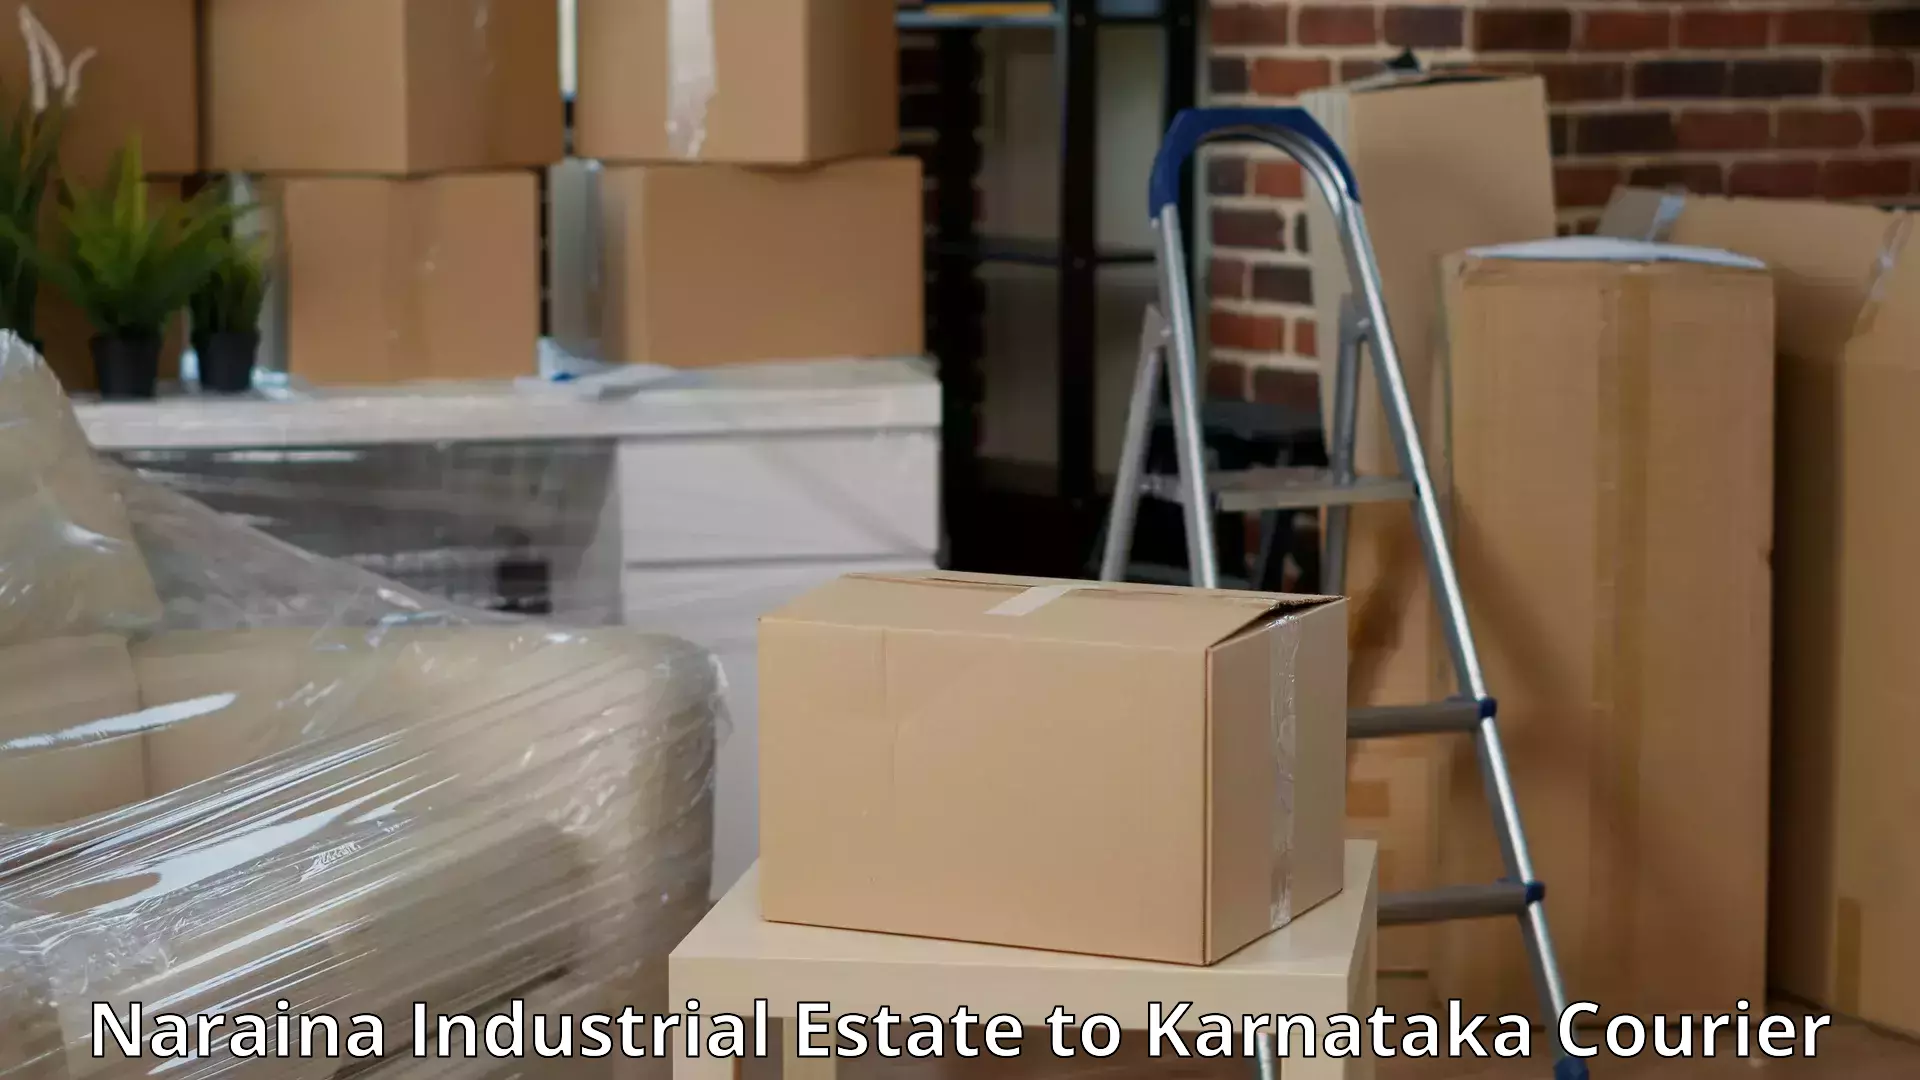 Trusted moving company in Naraina Industrial Estate to Jayanagar